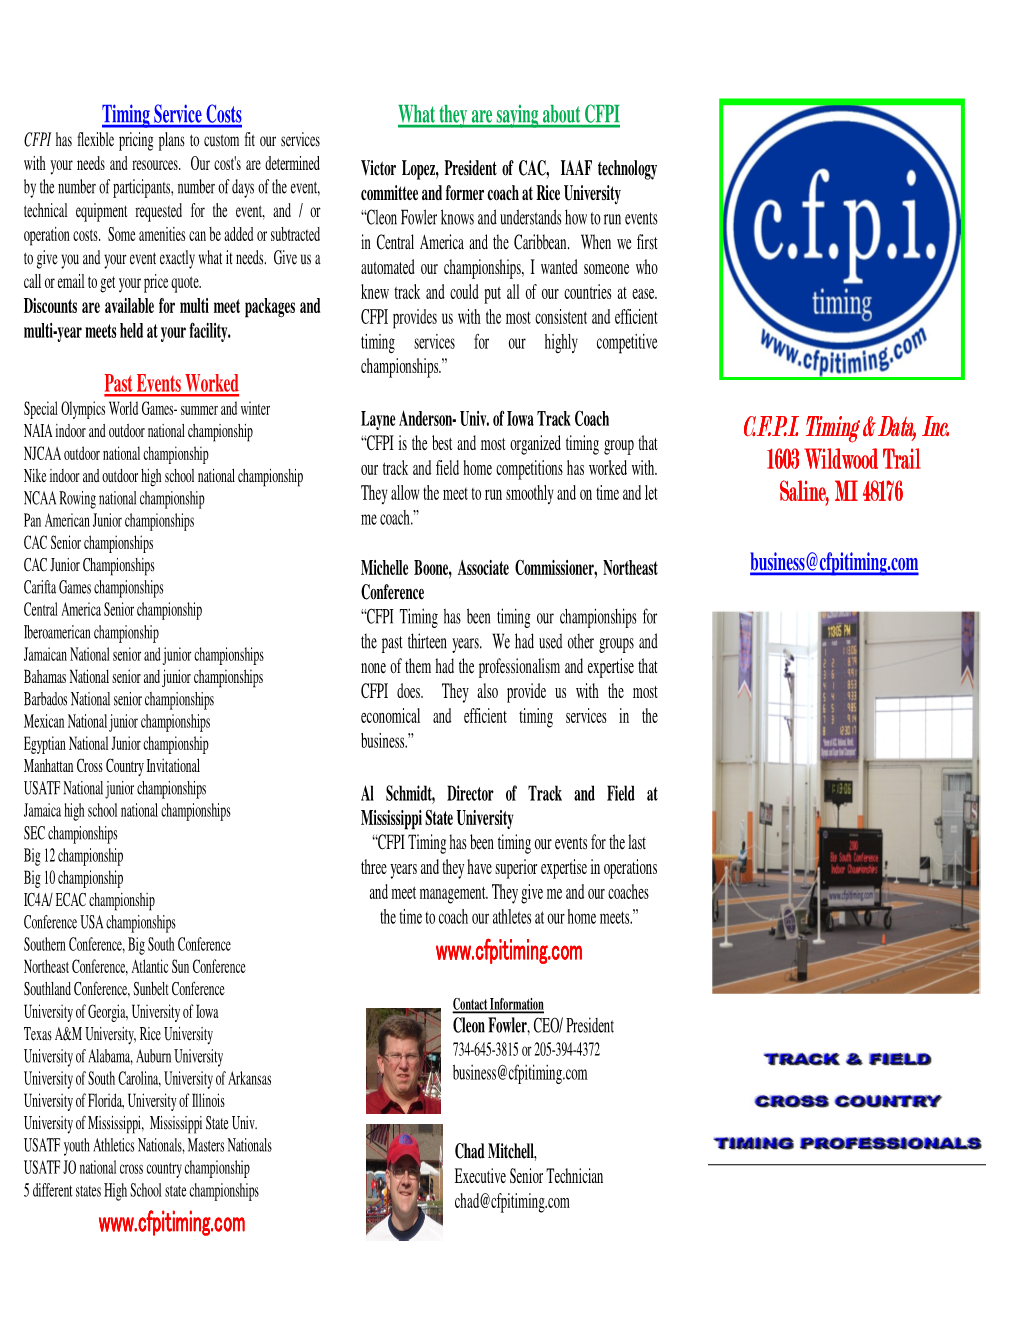 A Printable Information Brochure on C.F.P.I. Timing Services